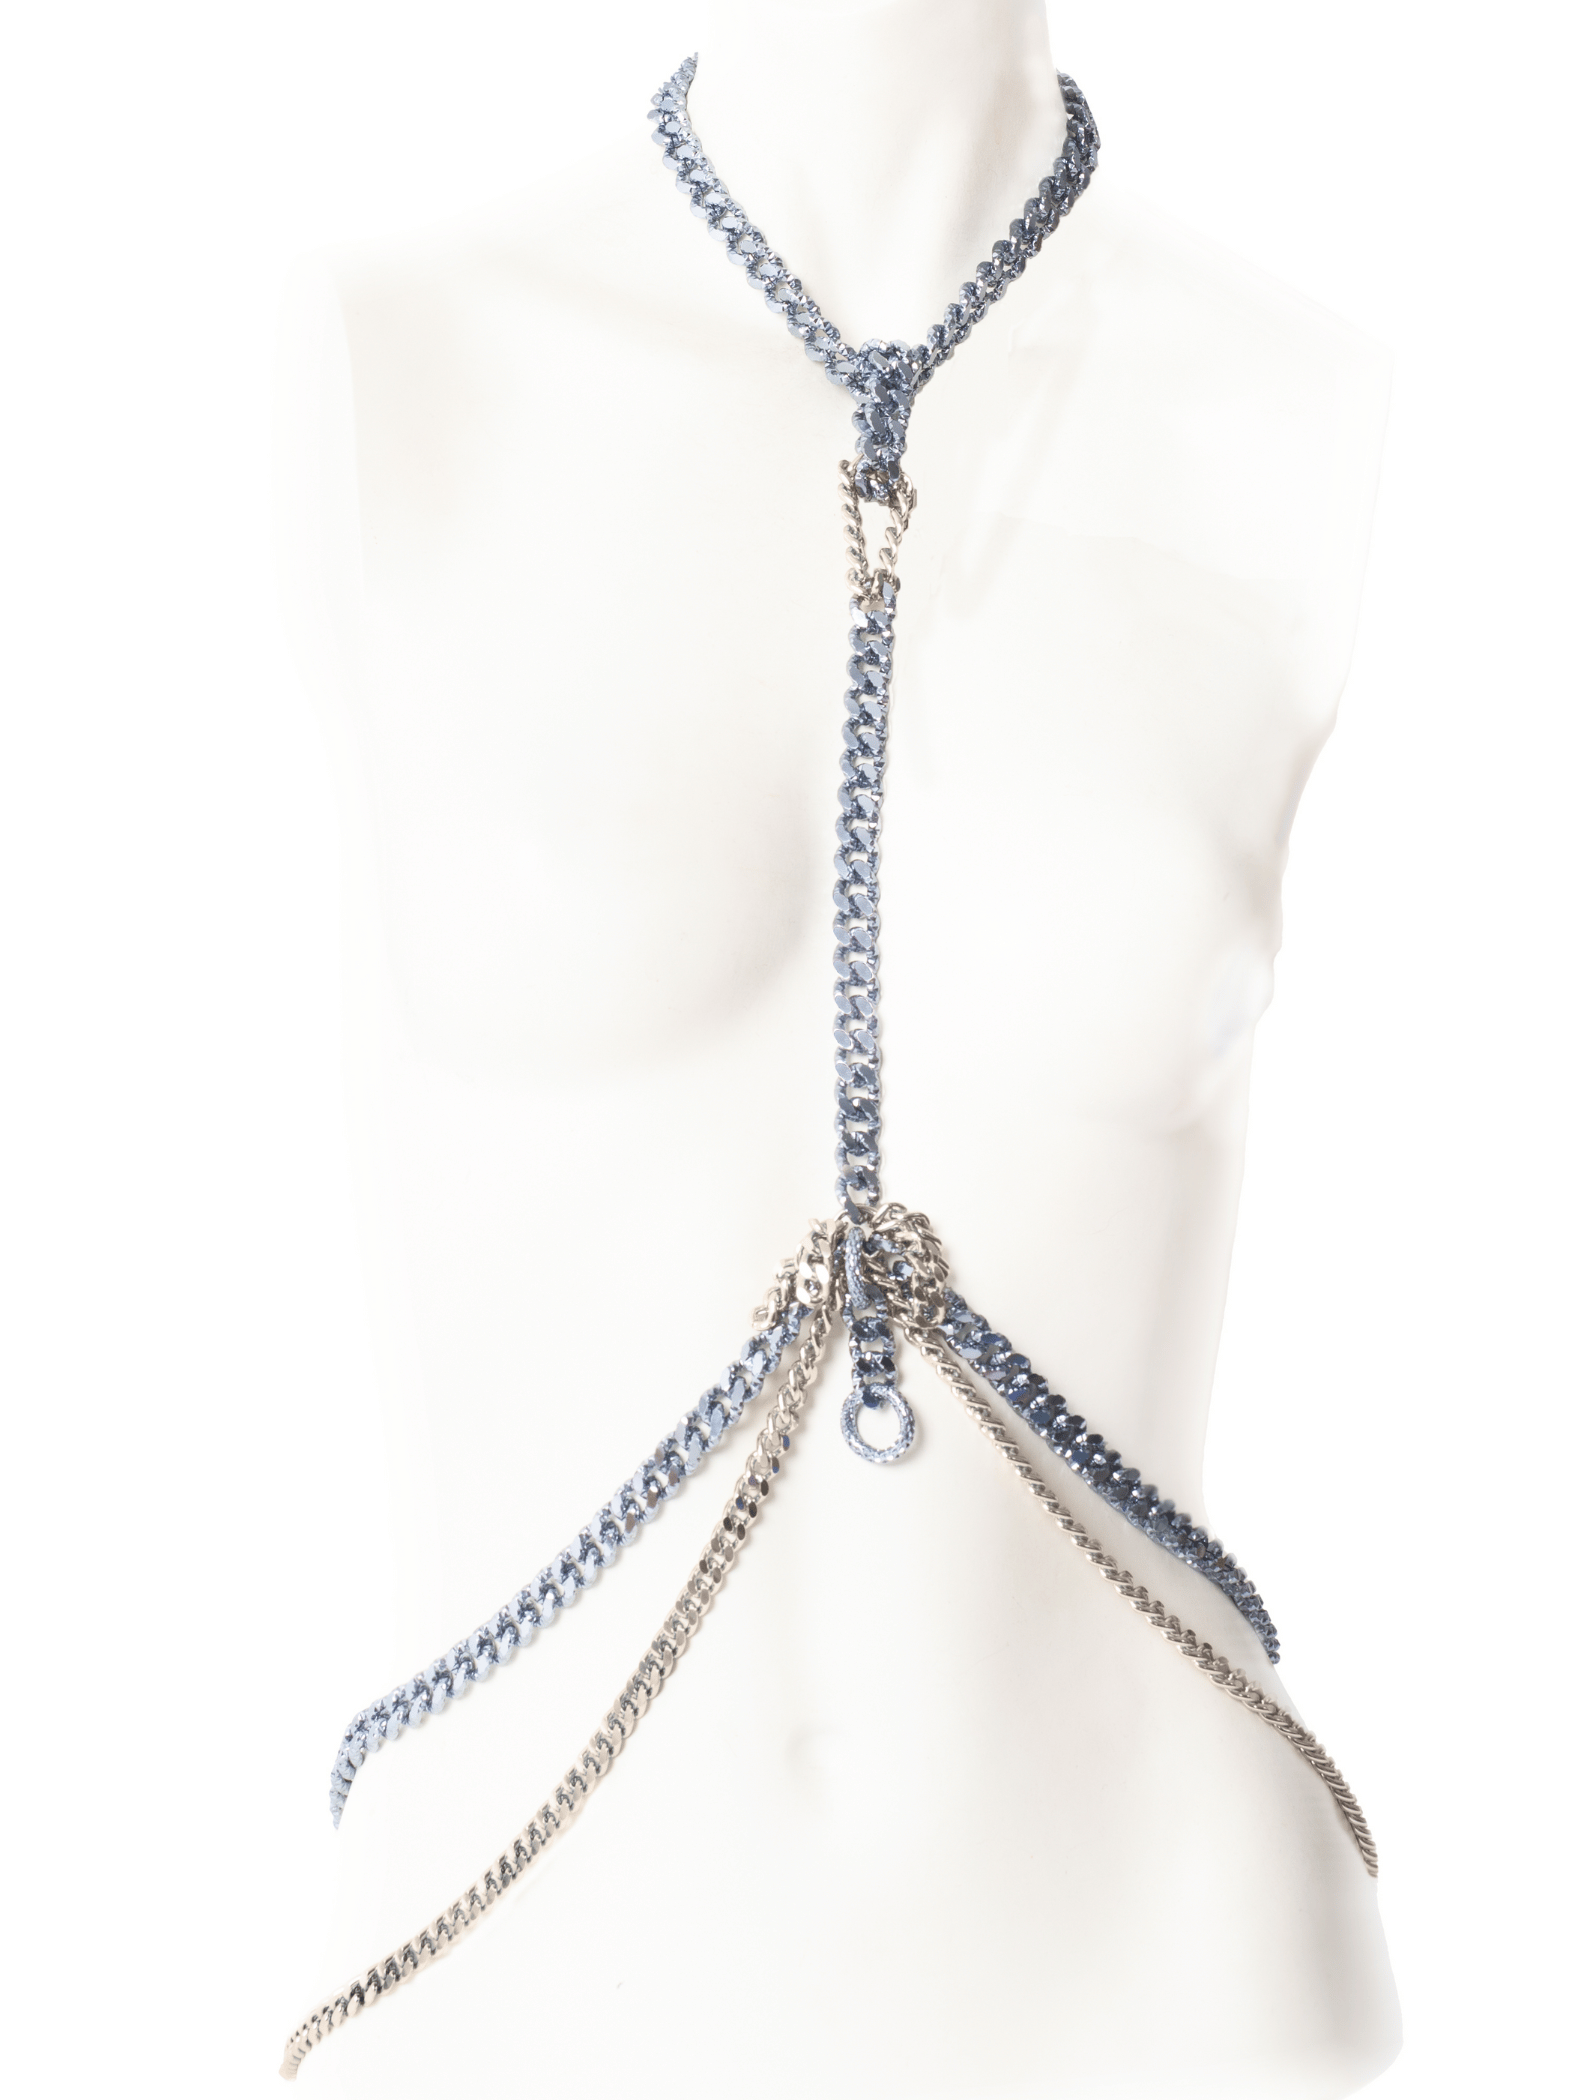 Silver blue body chain necklace